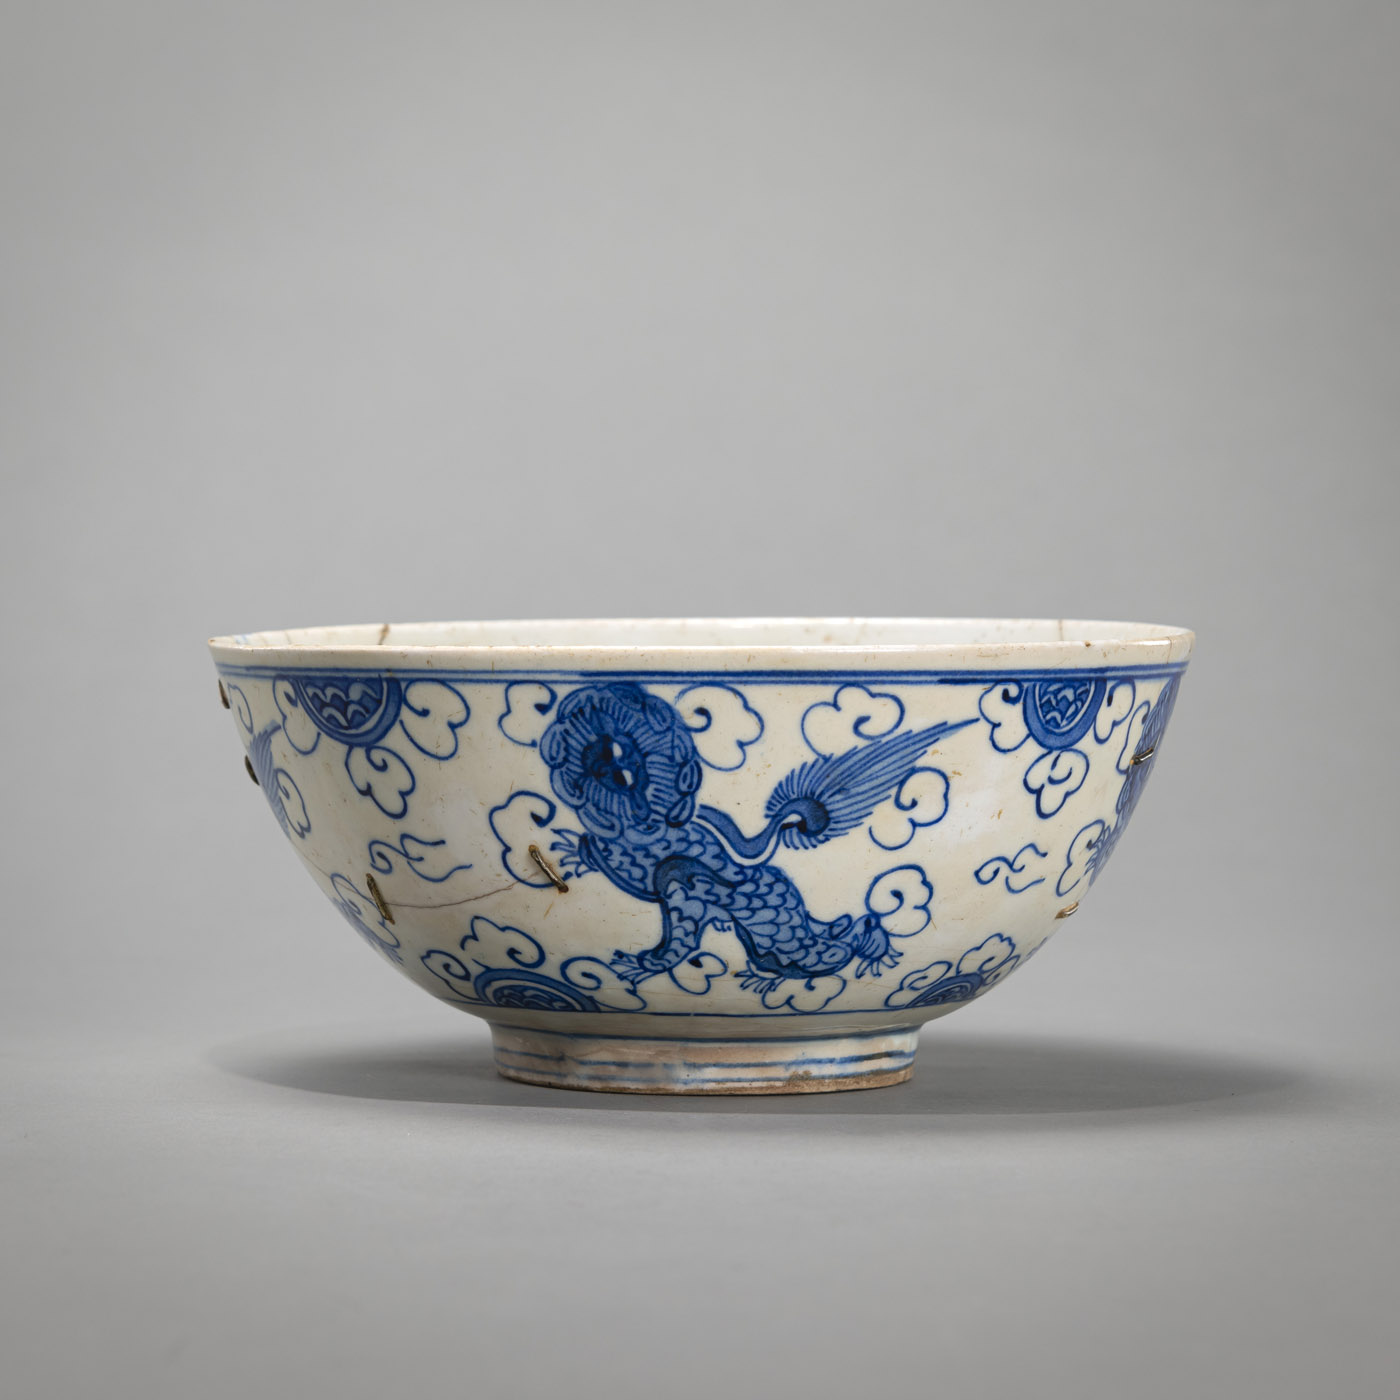 <b>A BLUE AND WHITE GLAZED POTTERY BOWL IN CHINESE STYLE WITH STYLIZED KILIN AMONG CLOUDS</b>